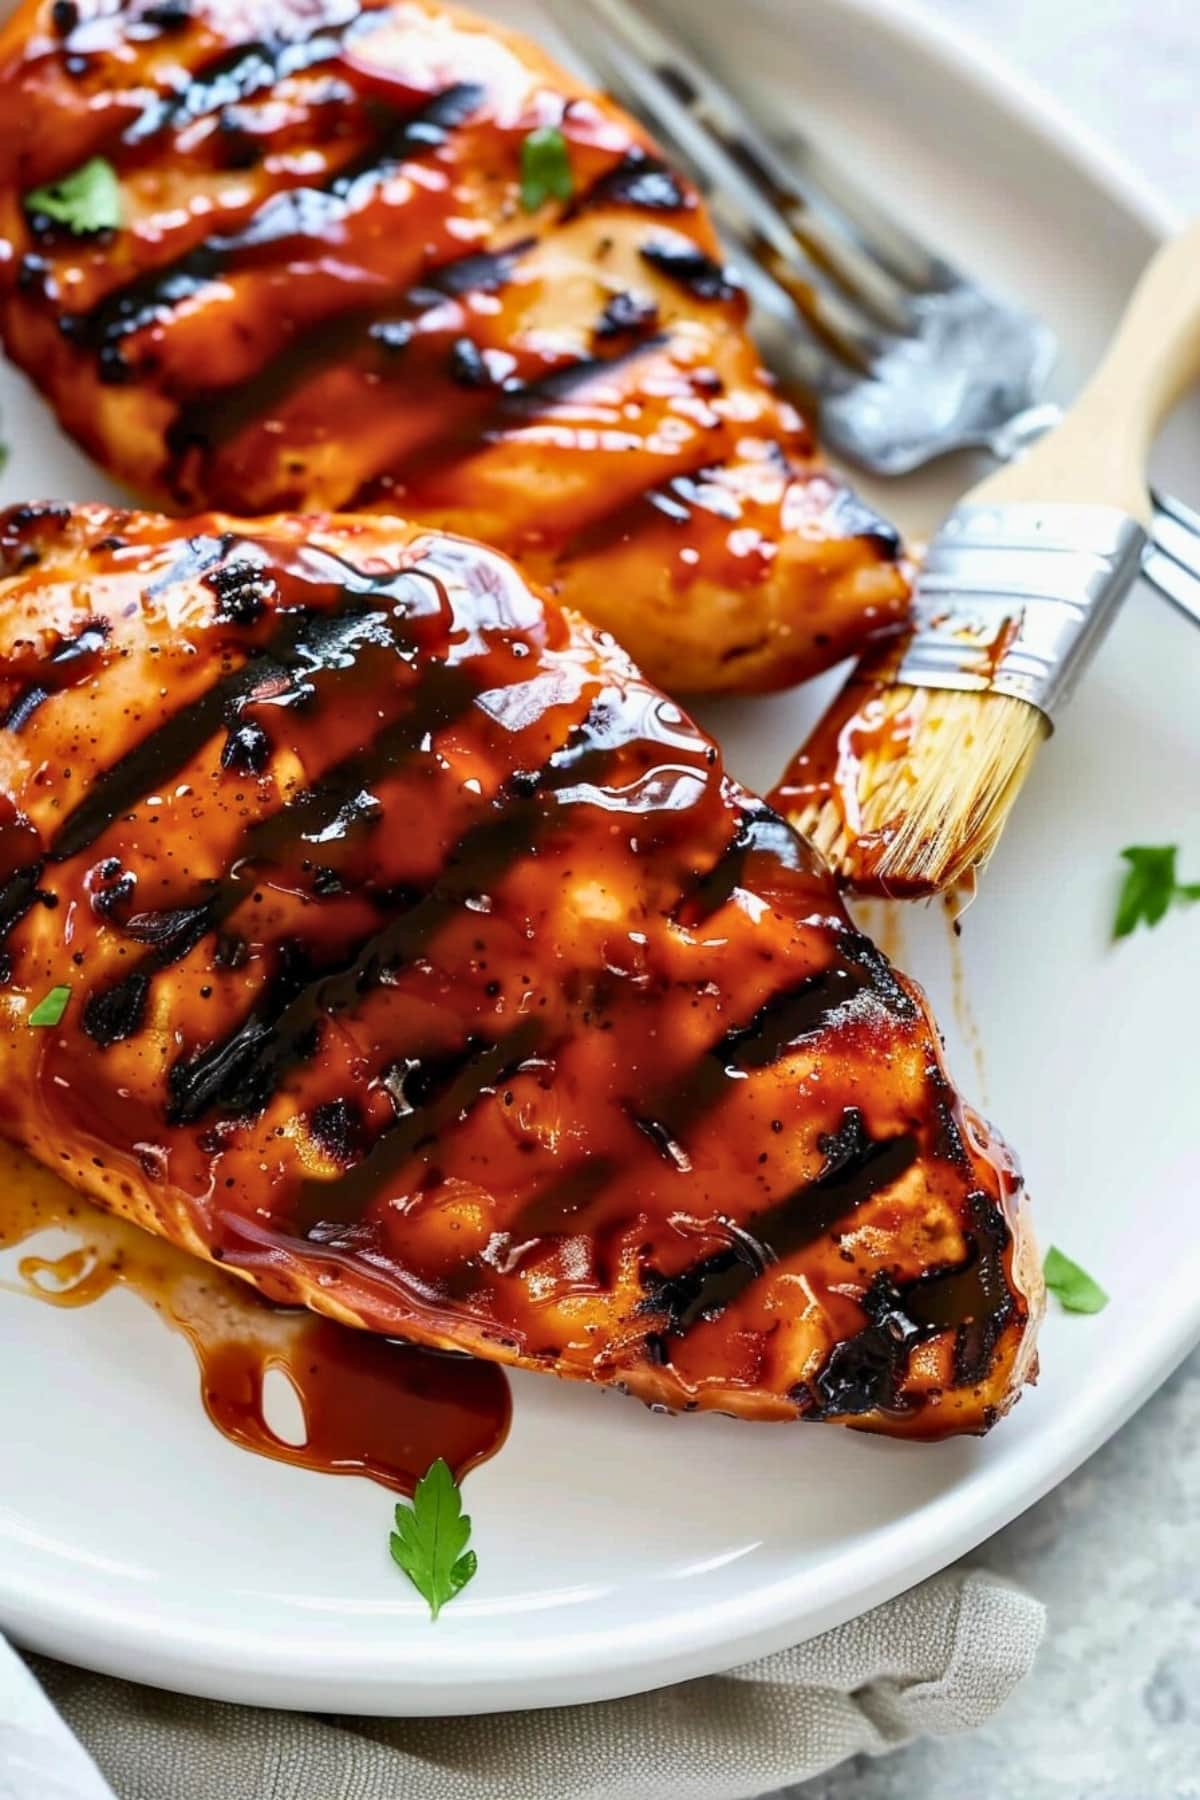 Chicken breast grilled brushed with barbecue sauce garnished with chopped parsley served on a white plate.